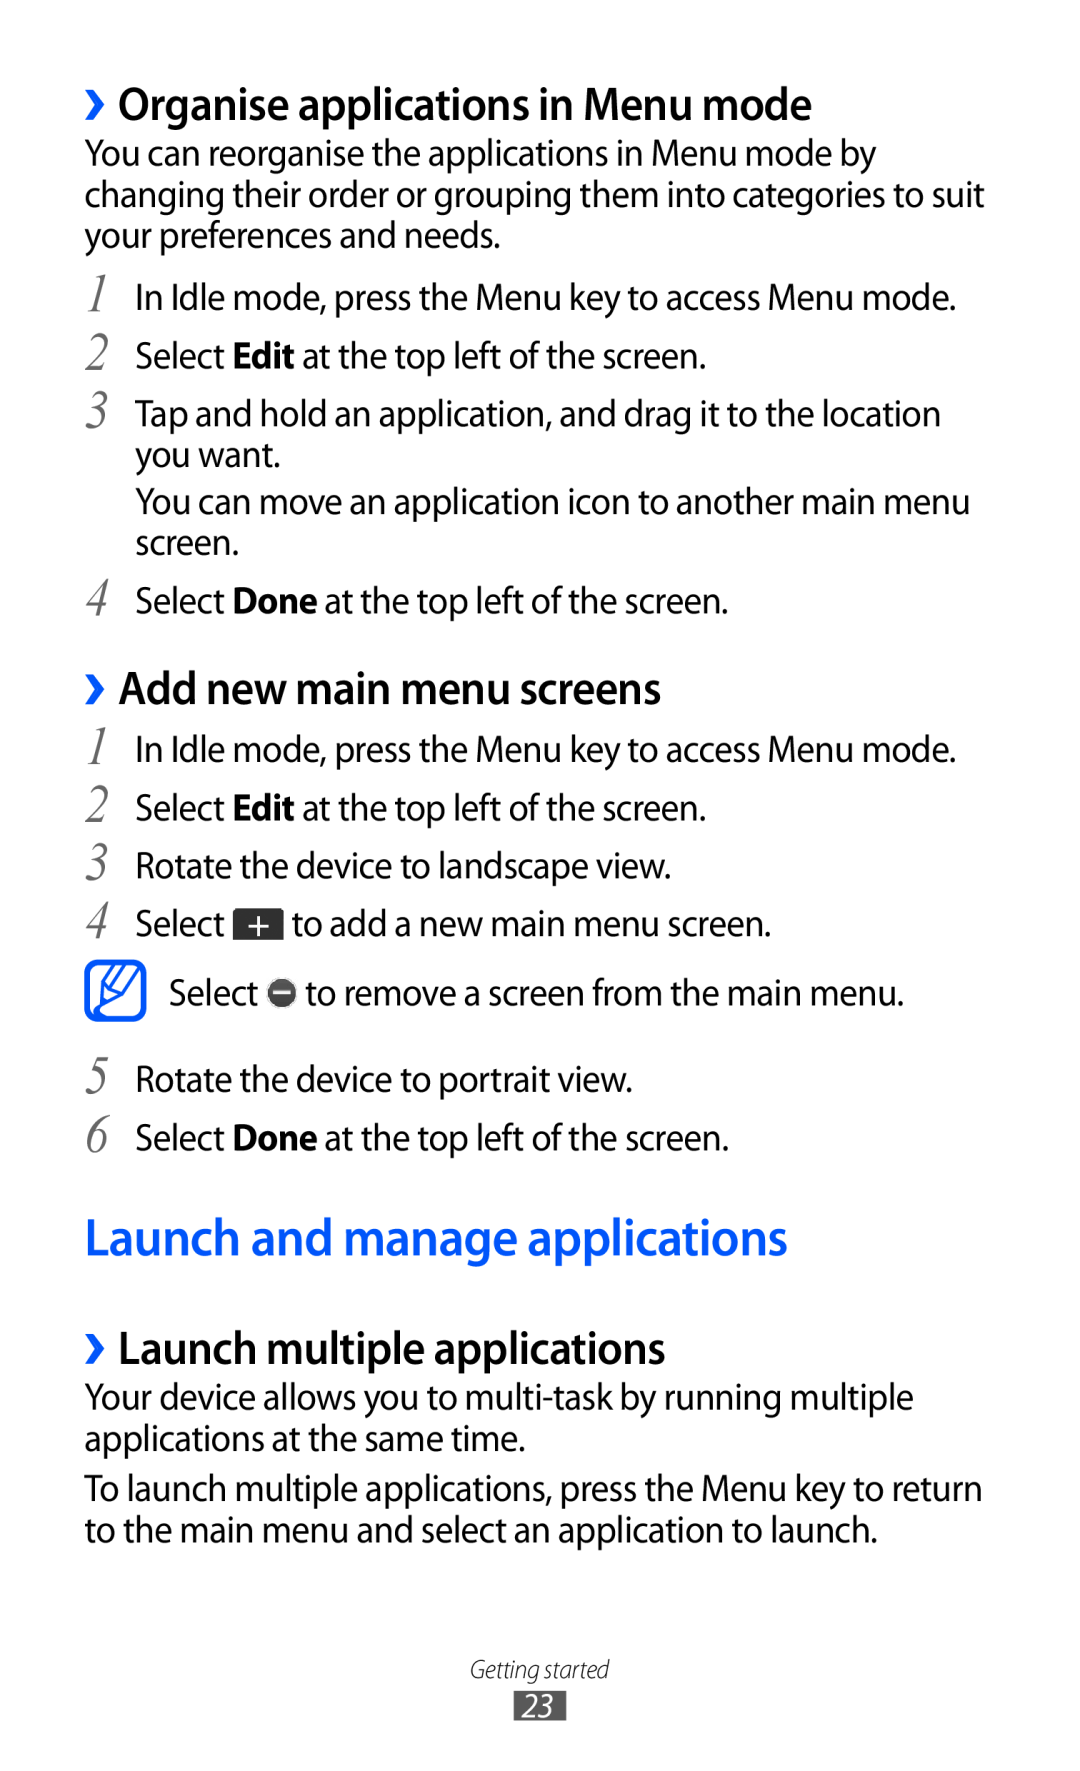 Samsung GT-C6712LKABGL Launch and manage applications, ››Organise applications in Menu mode, ››Add new main menu screens 